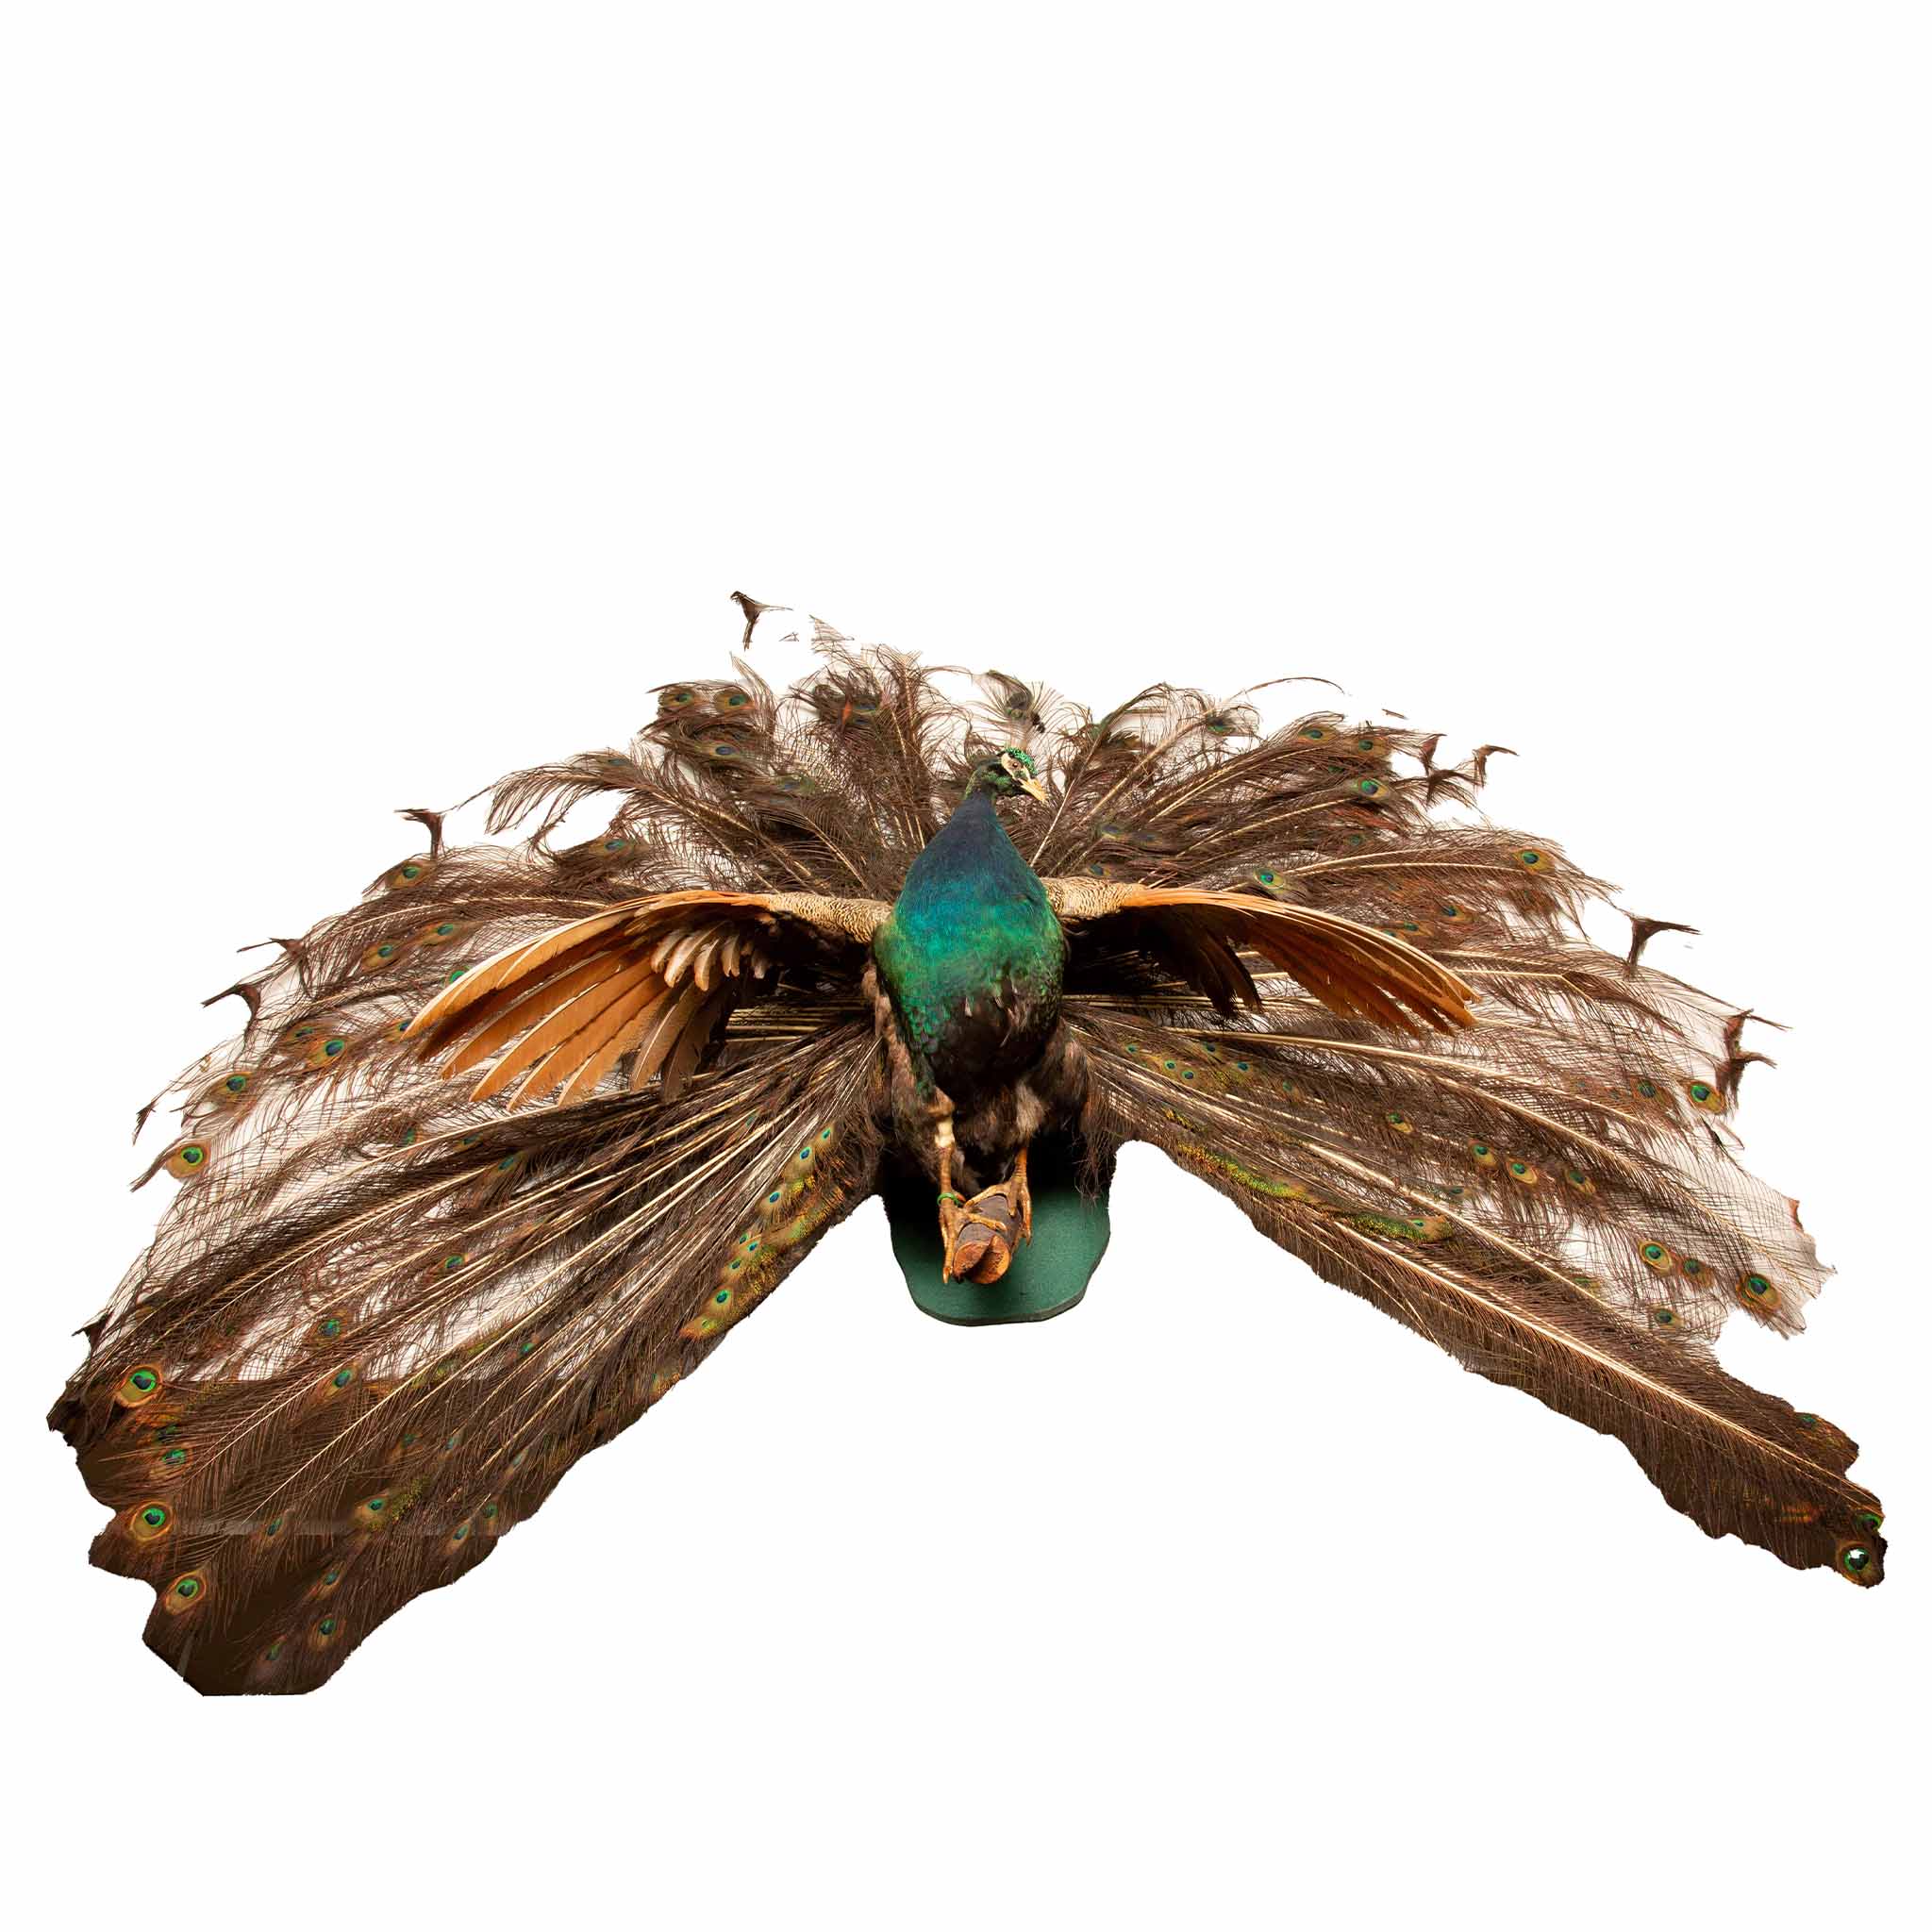 Exquisite Wall-Mounted Indian Blue Peacock Taxidermy: Feathers in Full Splendor